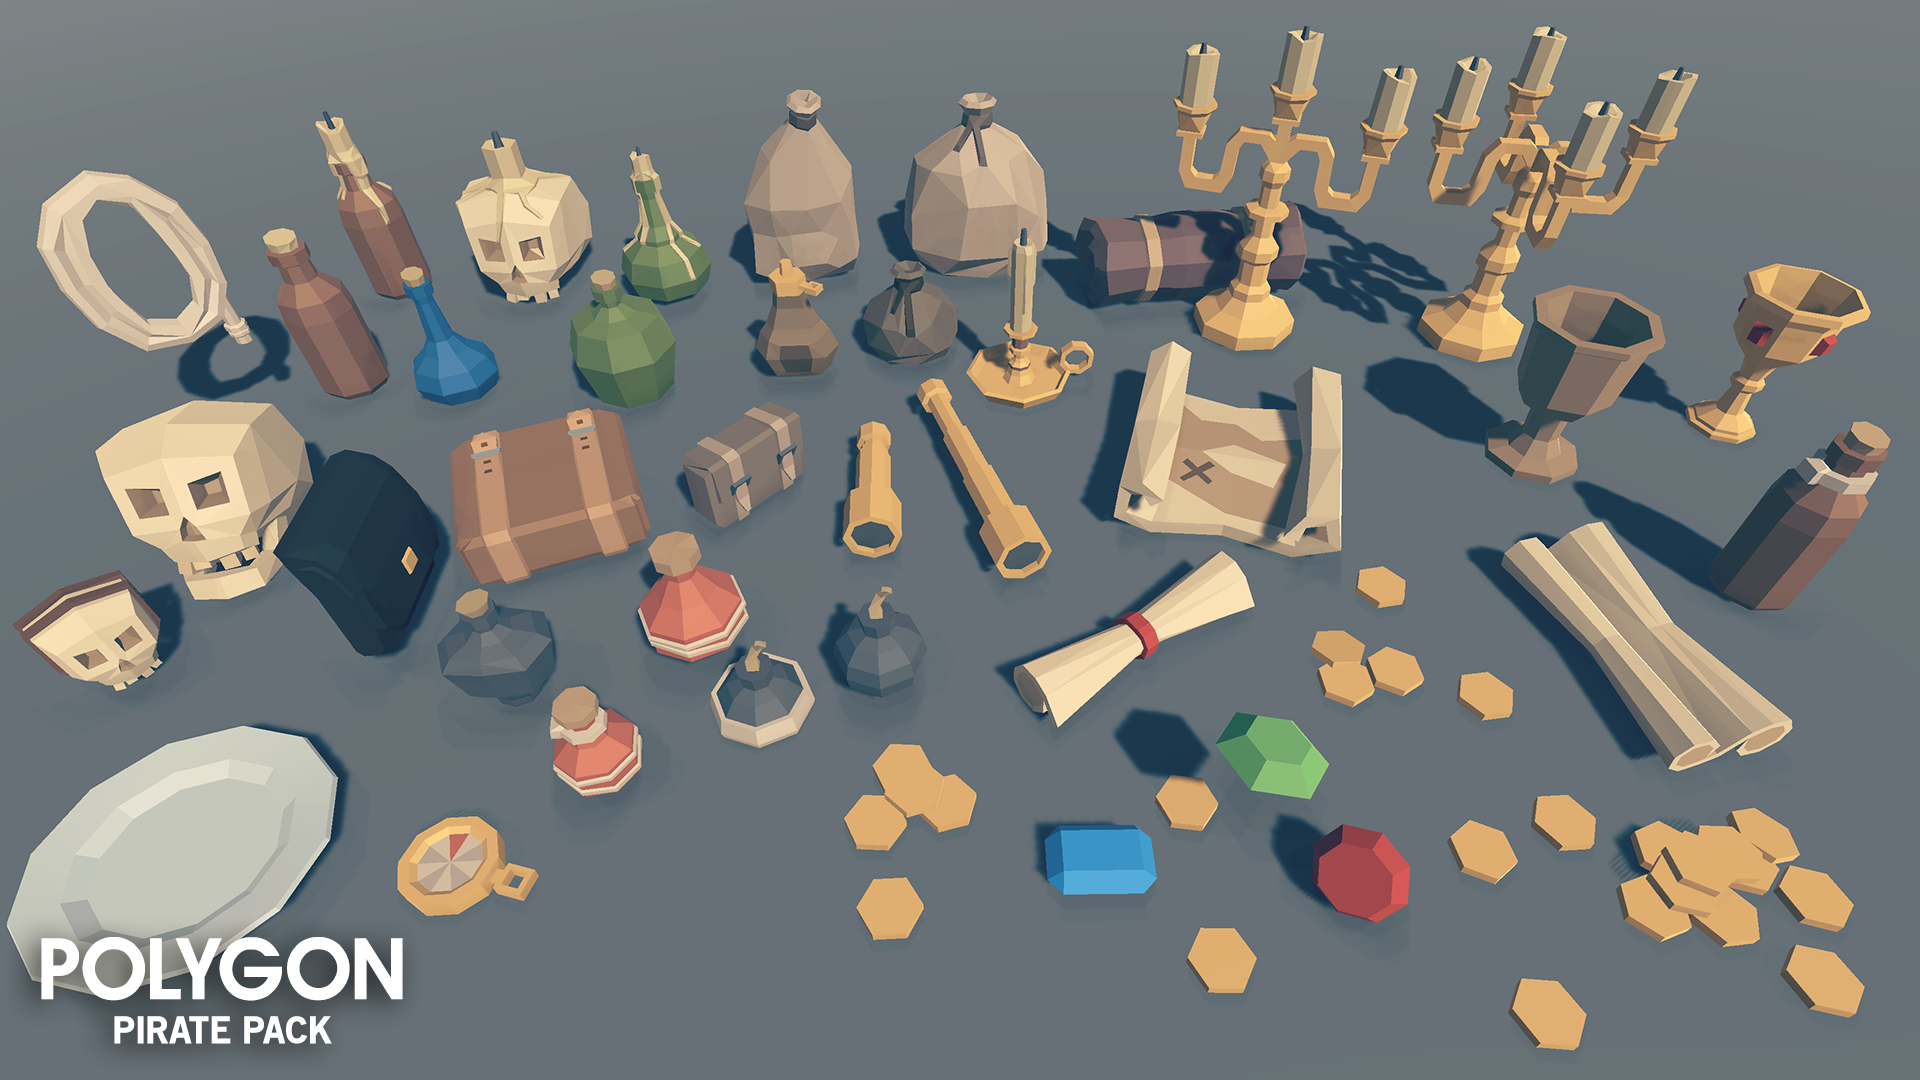 Pirate ship objects including candles, potions, gold coins, rubies and telescopes